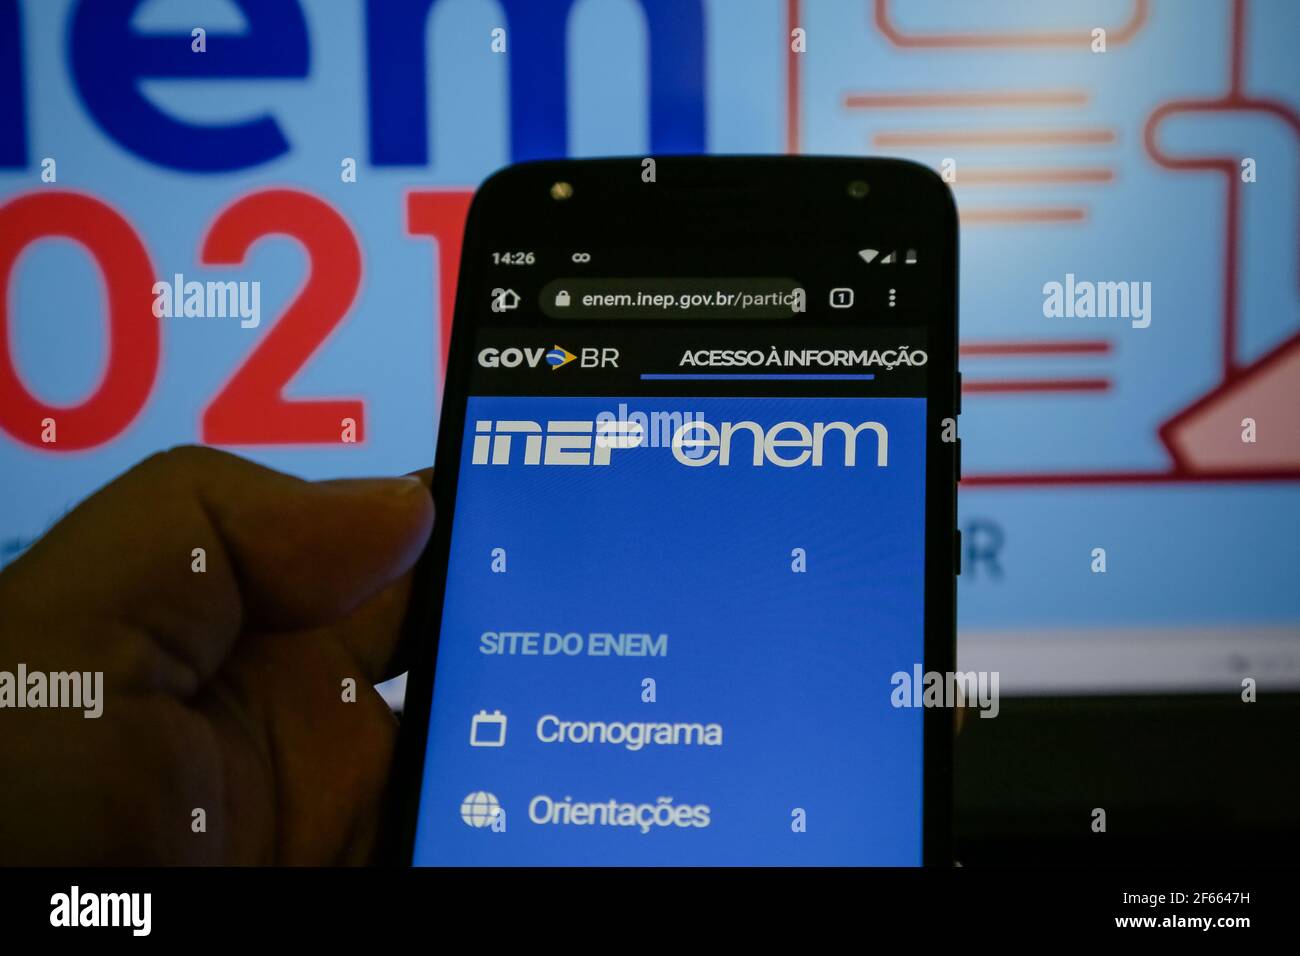 A phone shows the logos of INEP and ENEM in Sao Jose dos Campos on March 29, 2021. The National Institute for Educational Research Anísio Teixeira (Inep) will release this Monday, March 29, the result of Enem 2020 (Exame Nacional do Ensino Medio). The forecast, according to the agency, is that the grades will come out after 6 pm. (Photo: Luis Lima Jr/Fotoarena/Sipa USA) Stock Photo